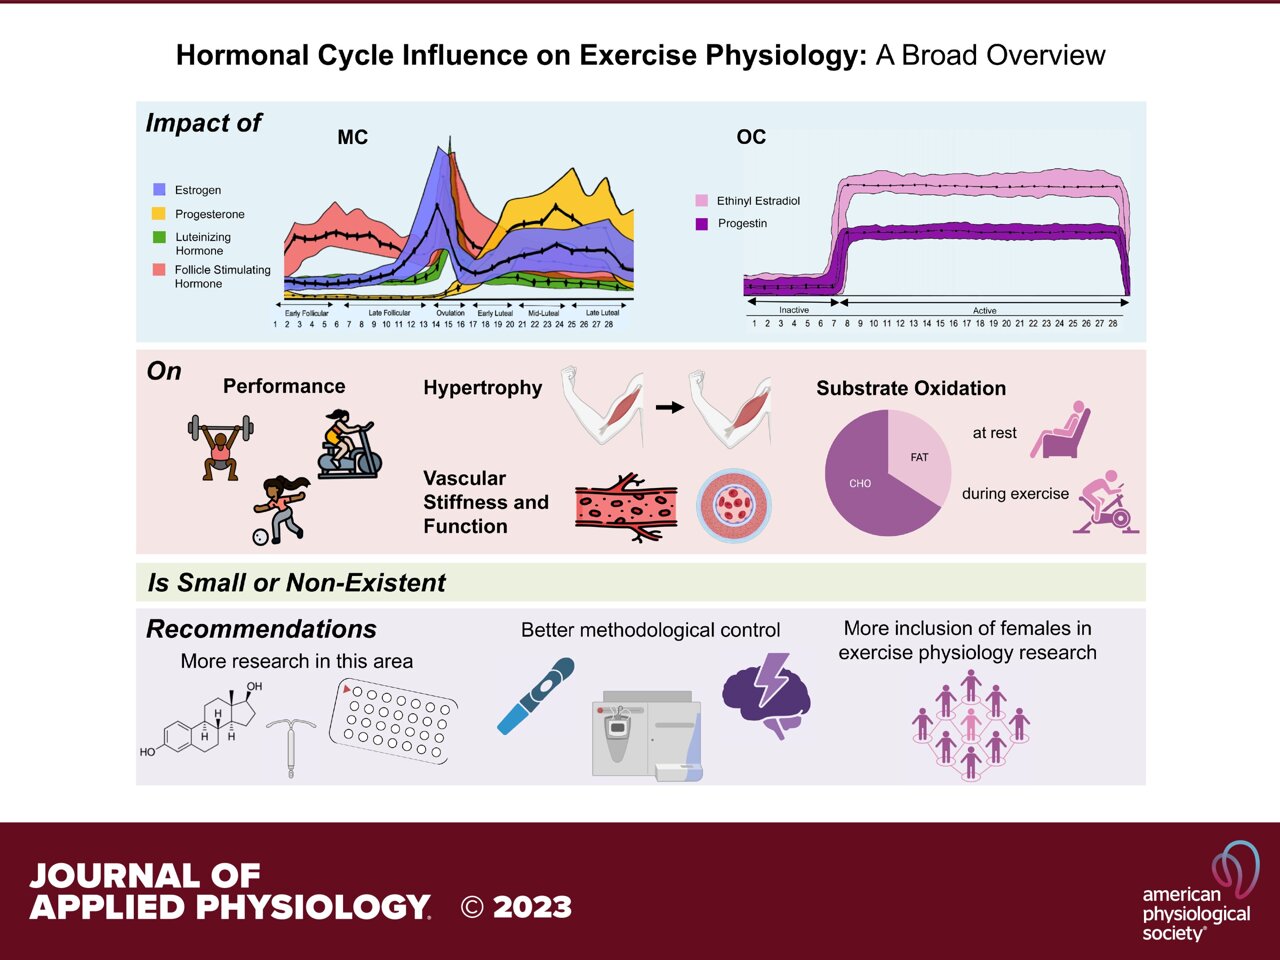 Frontiers  Current evidence shows no influence of women's menstrual cycle  phase on acute strength performance or adaptations to resistance exercise  training